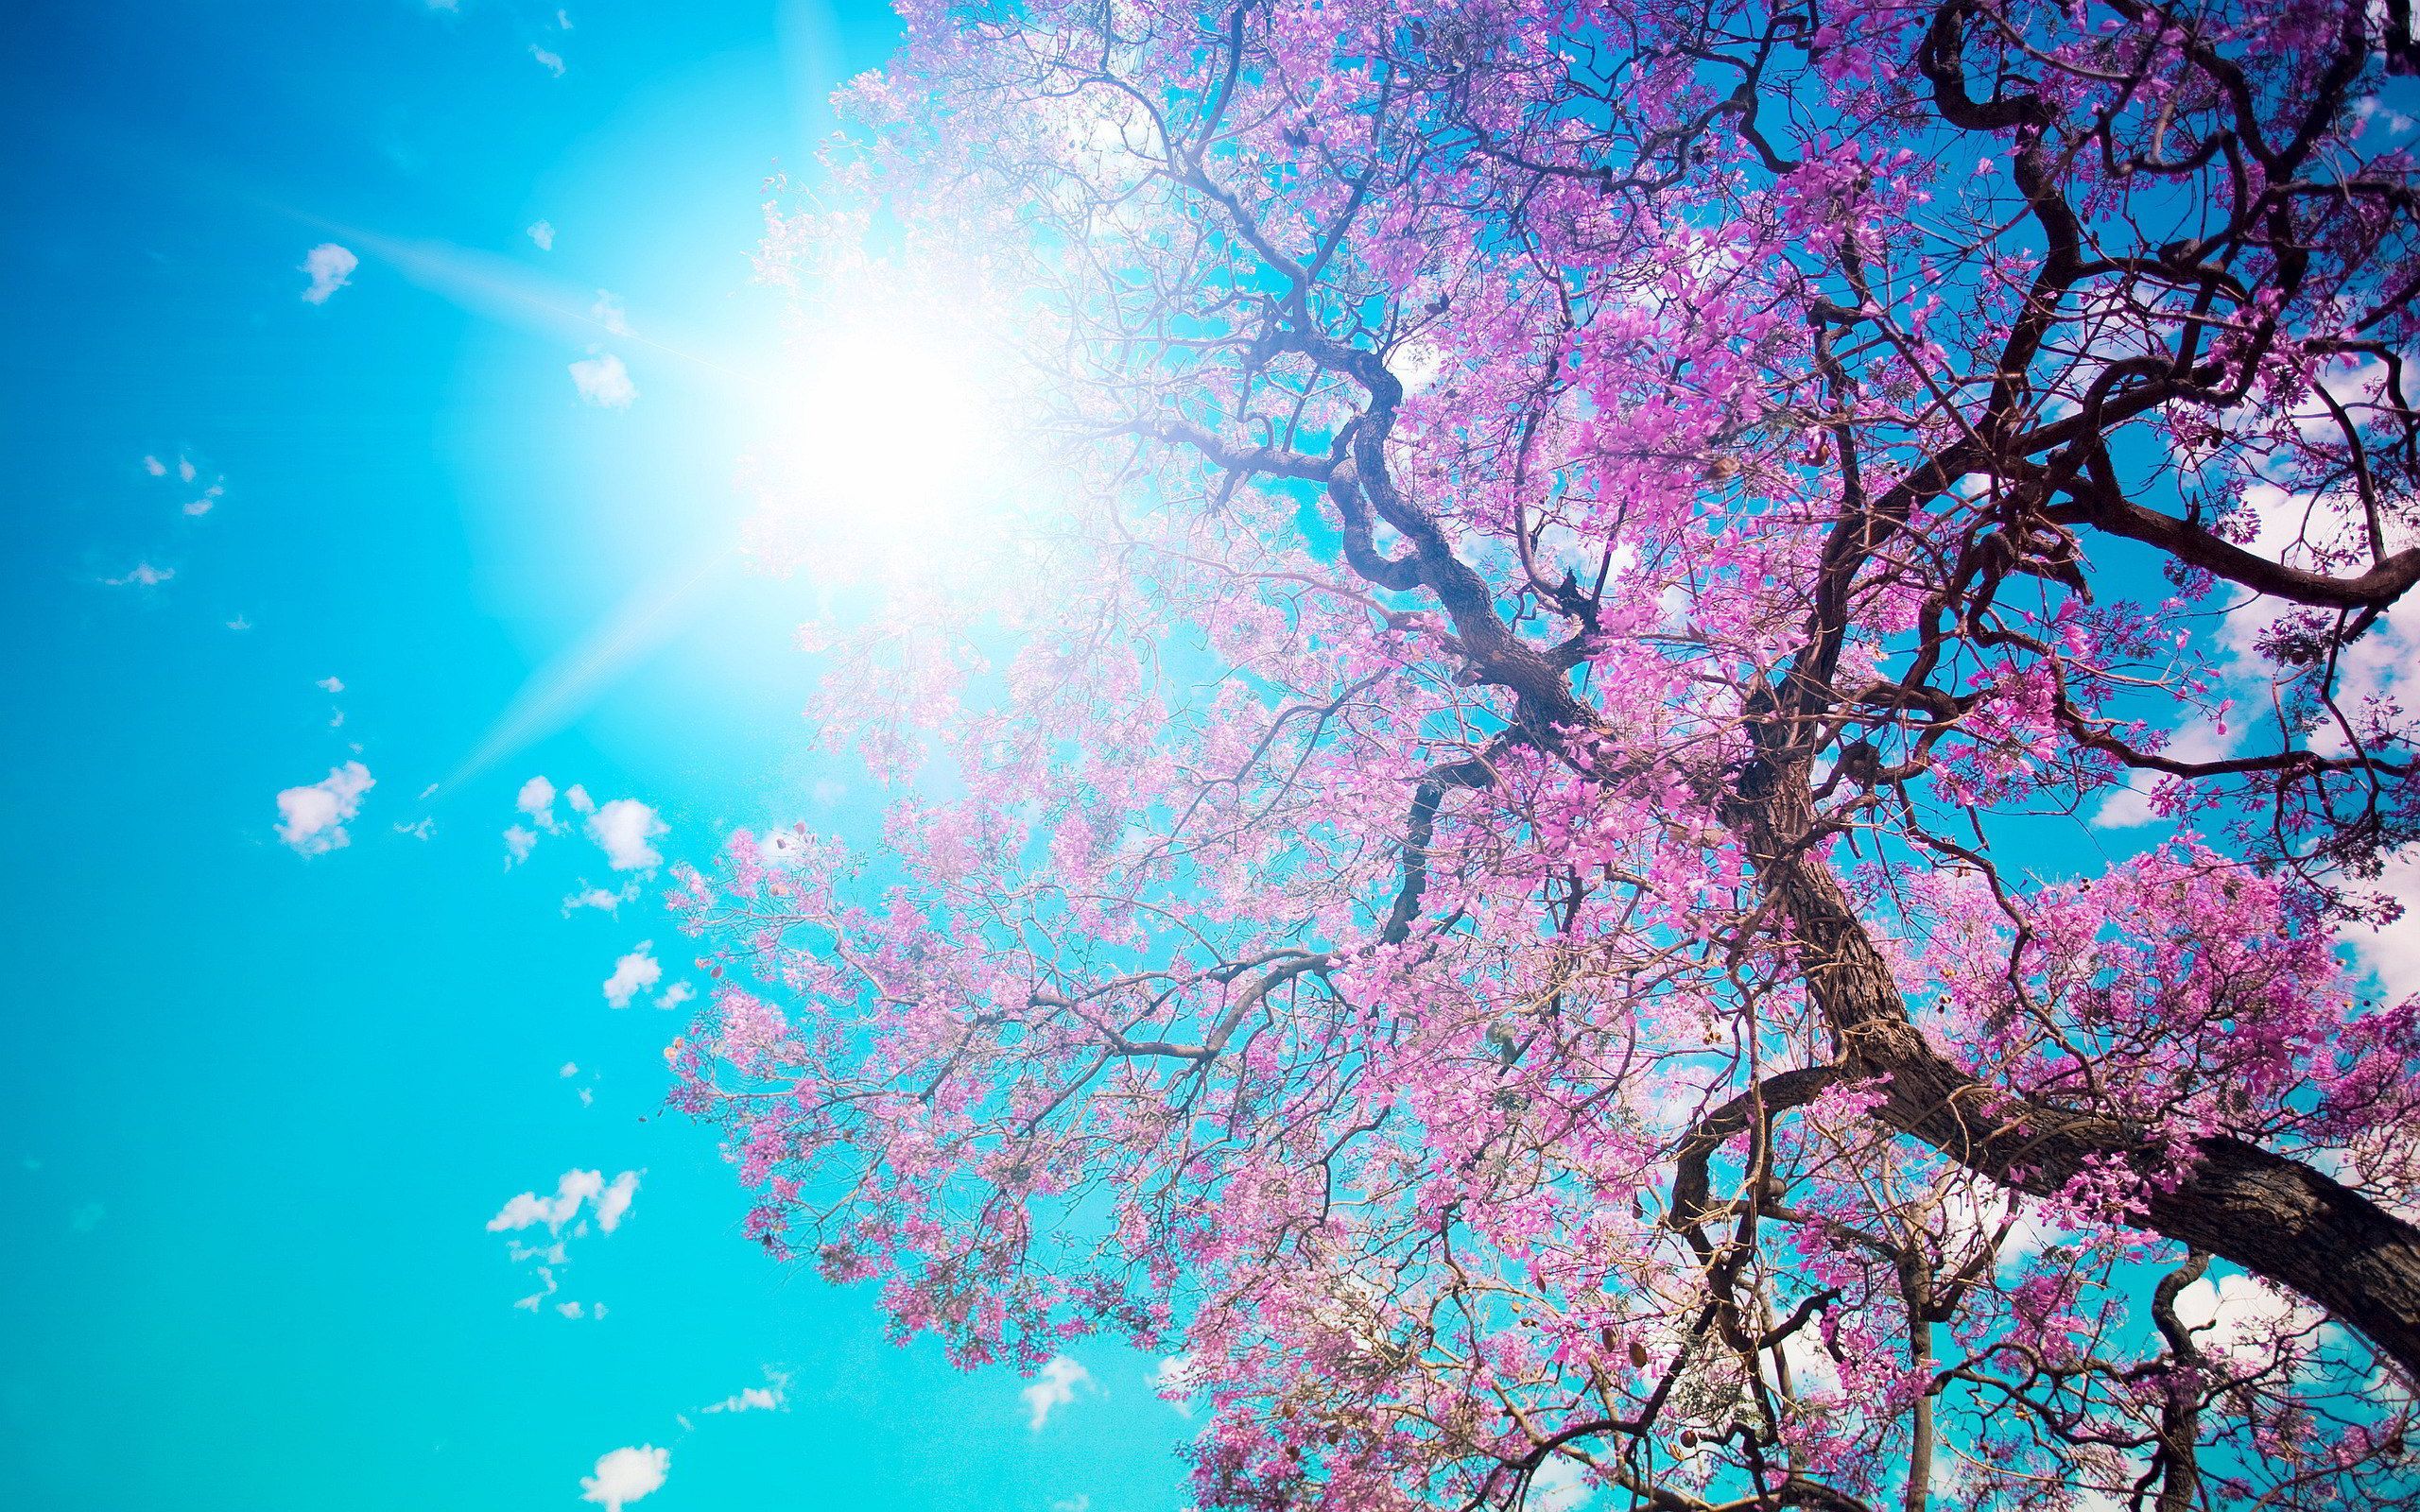 Sunny Spring Playlist. Spring wallpaper, Beautiful nature spring, Spring picture